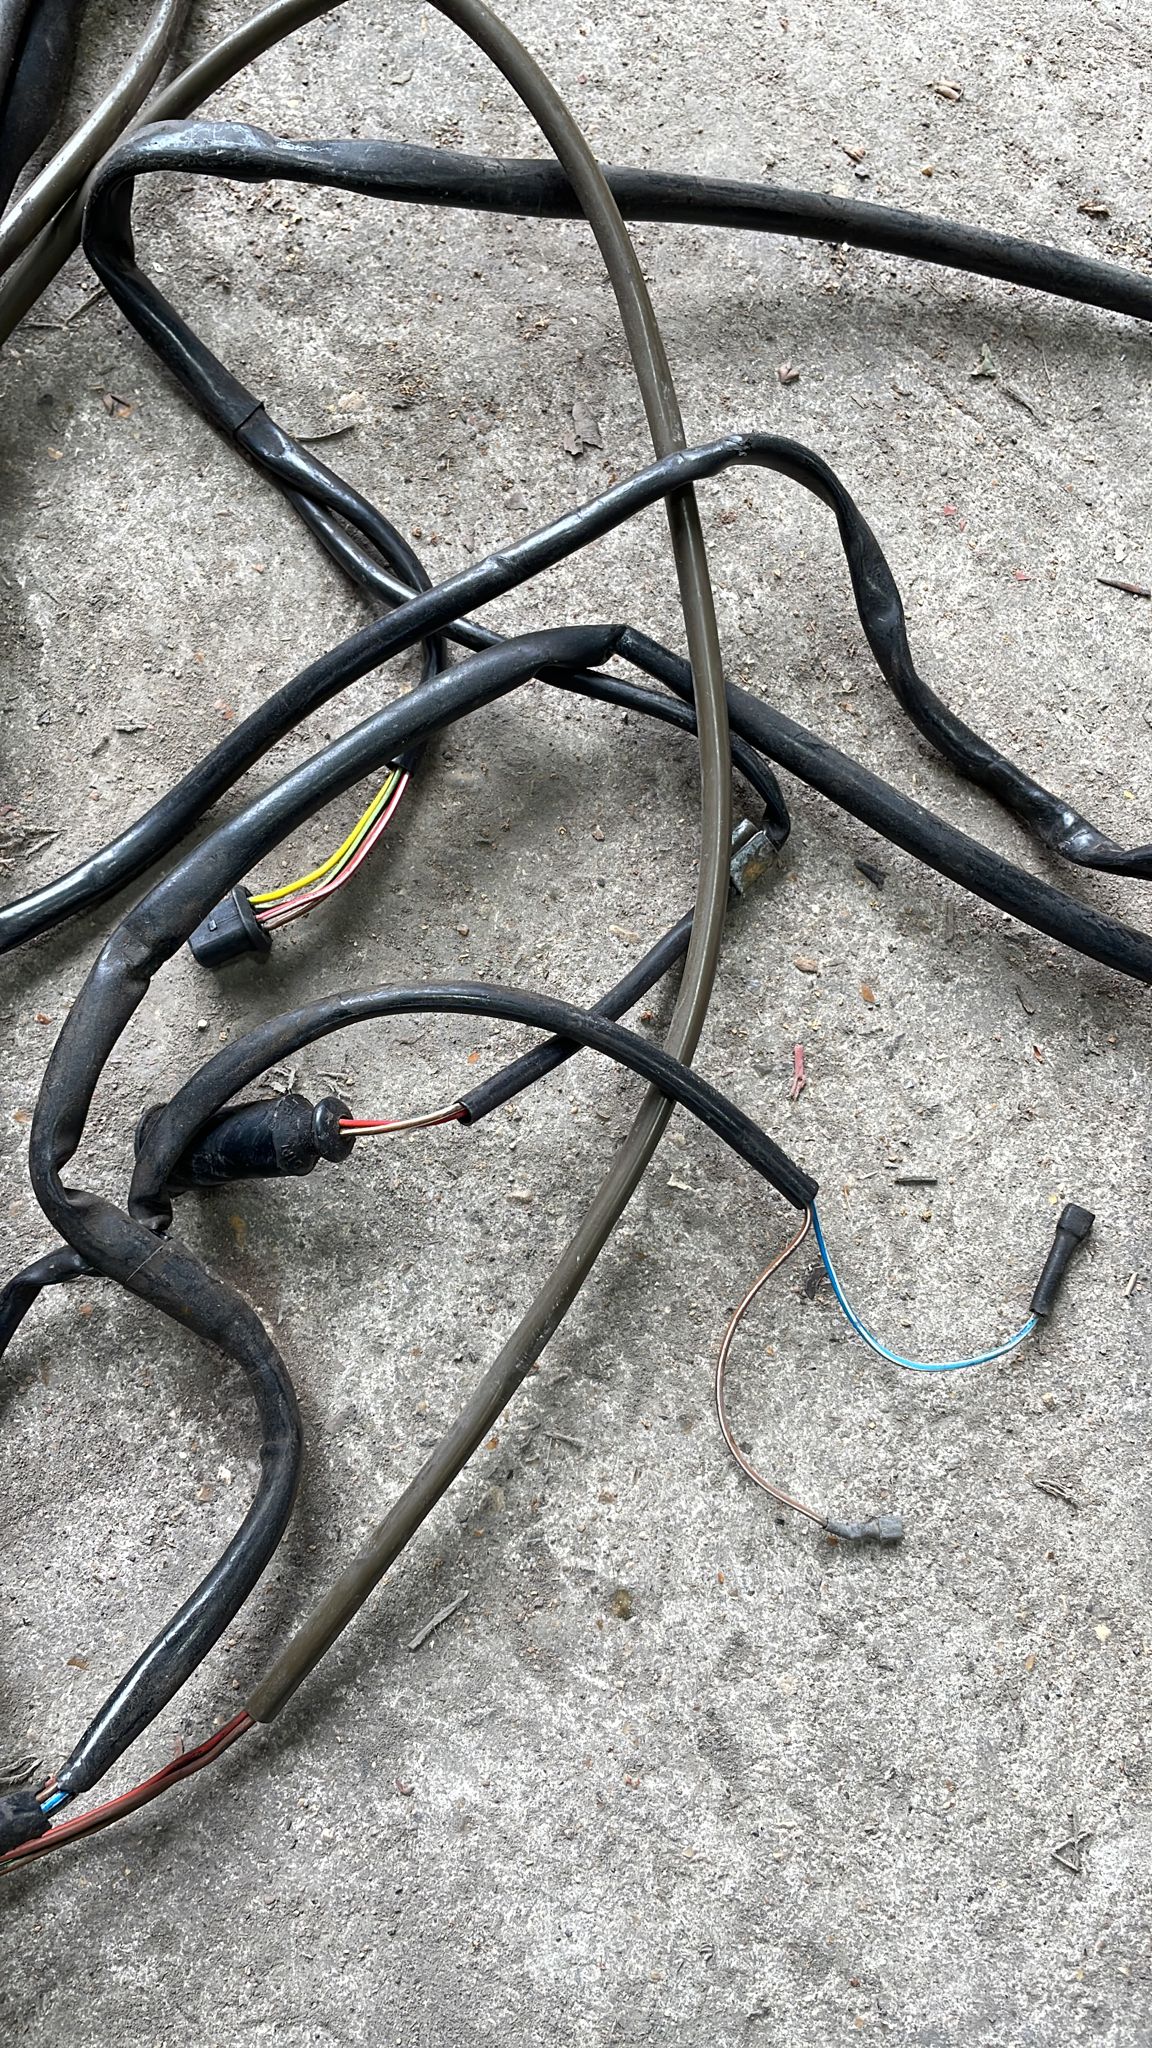 Porsche 928 S2 1986 Drivers Door wiring harness, loom, from a LHD car, used